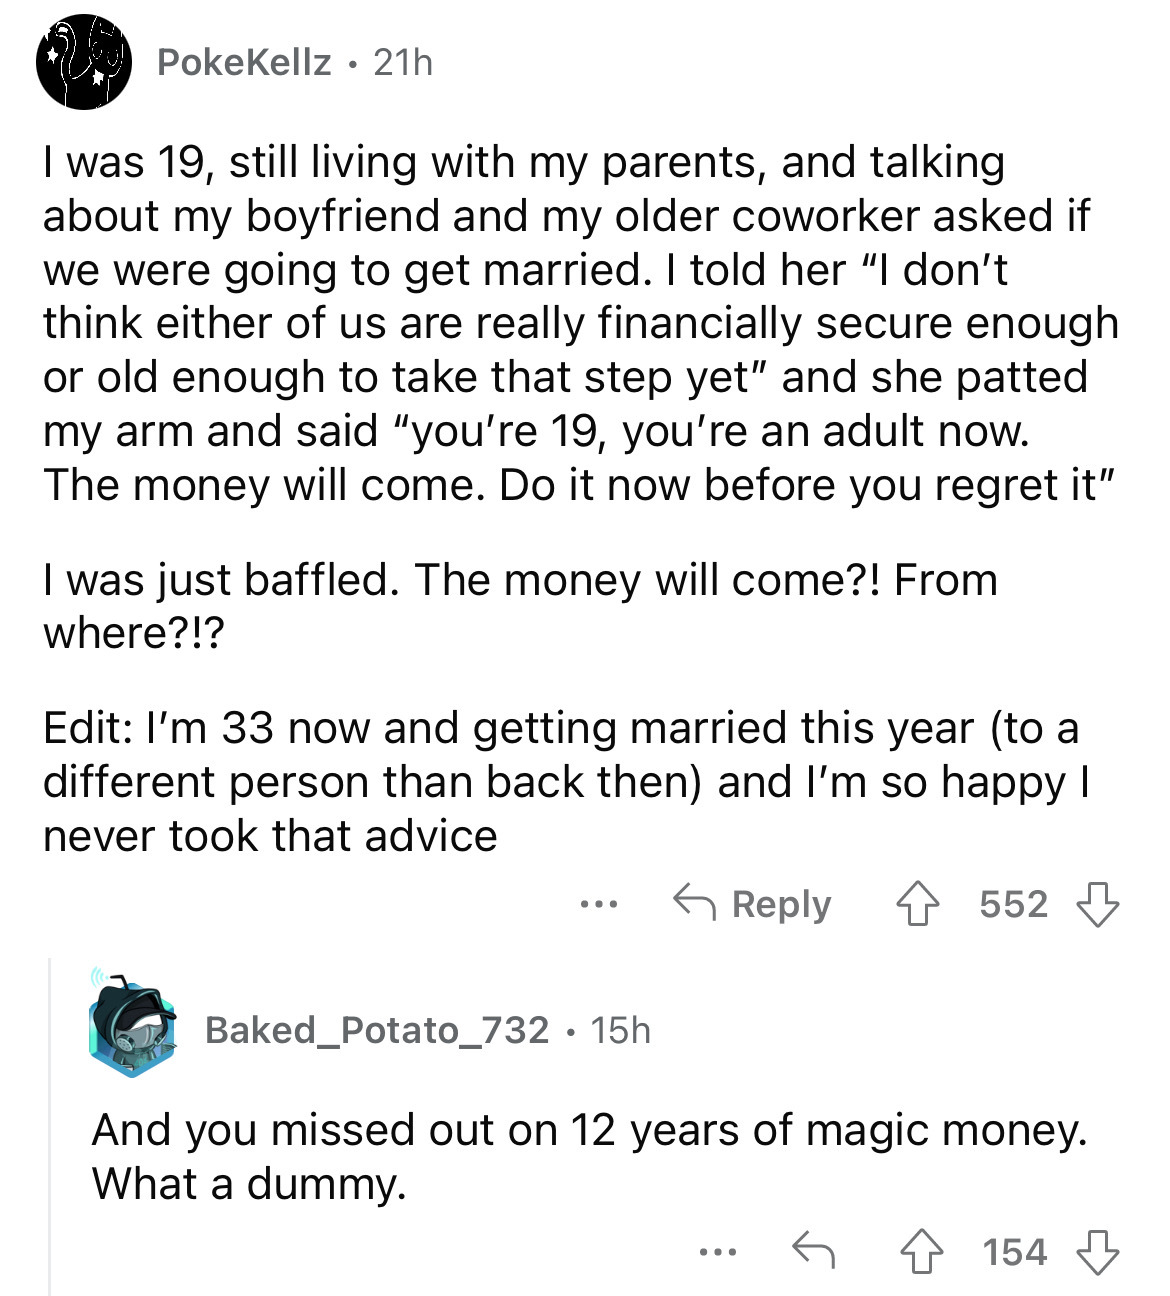 say i love you for law students - PokeKellz 21h I was 19, still living with my parents, and talking about my boyfriend and my older coworker asked if we were going to get married. I told her "I don't think either of us are really financially secure enough